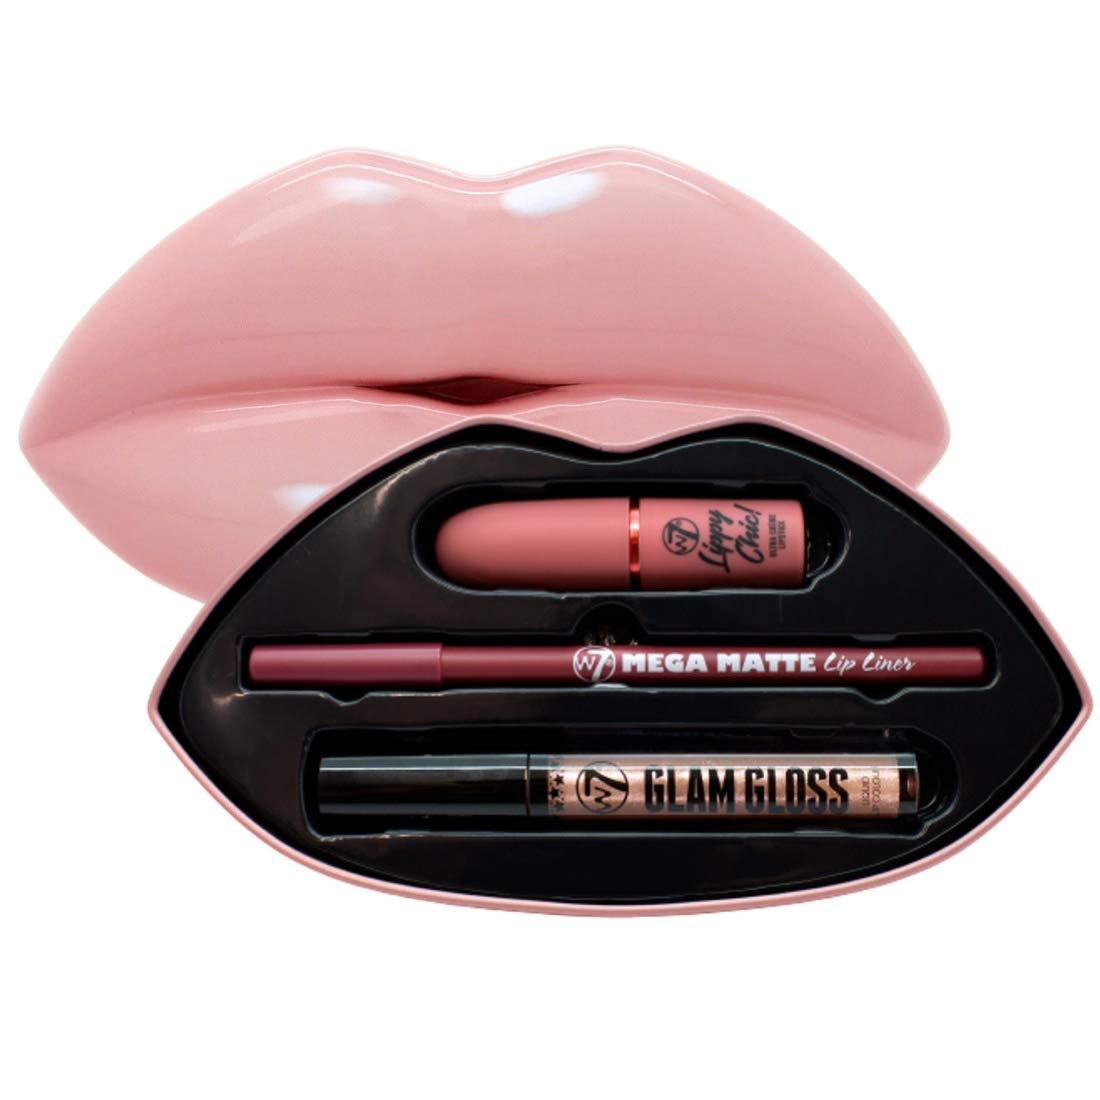 Kiss Kit Lip Gift Set | Colorway: Mauve Over - Deep Pink, Red & Nude Colors | Lipstick, Lip Liner and Gloss